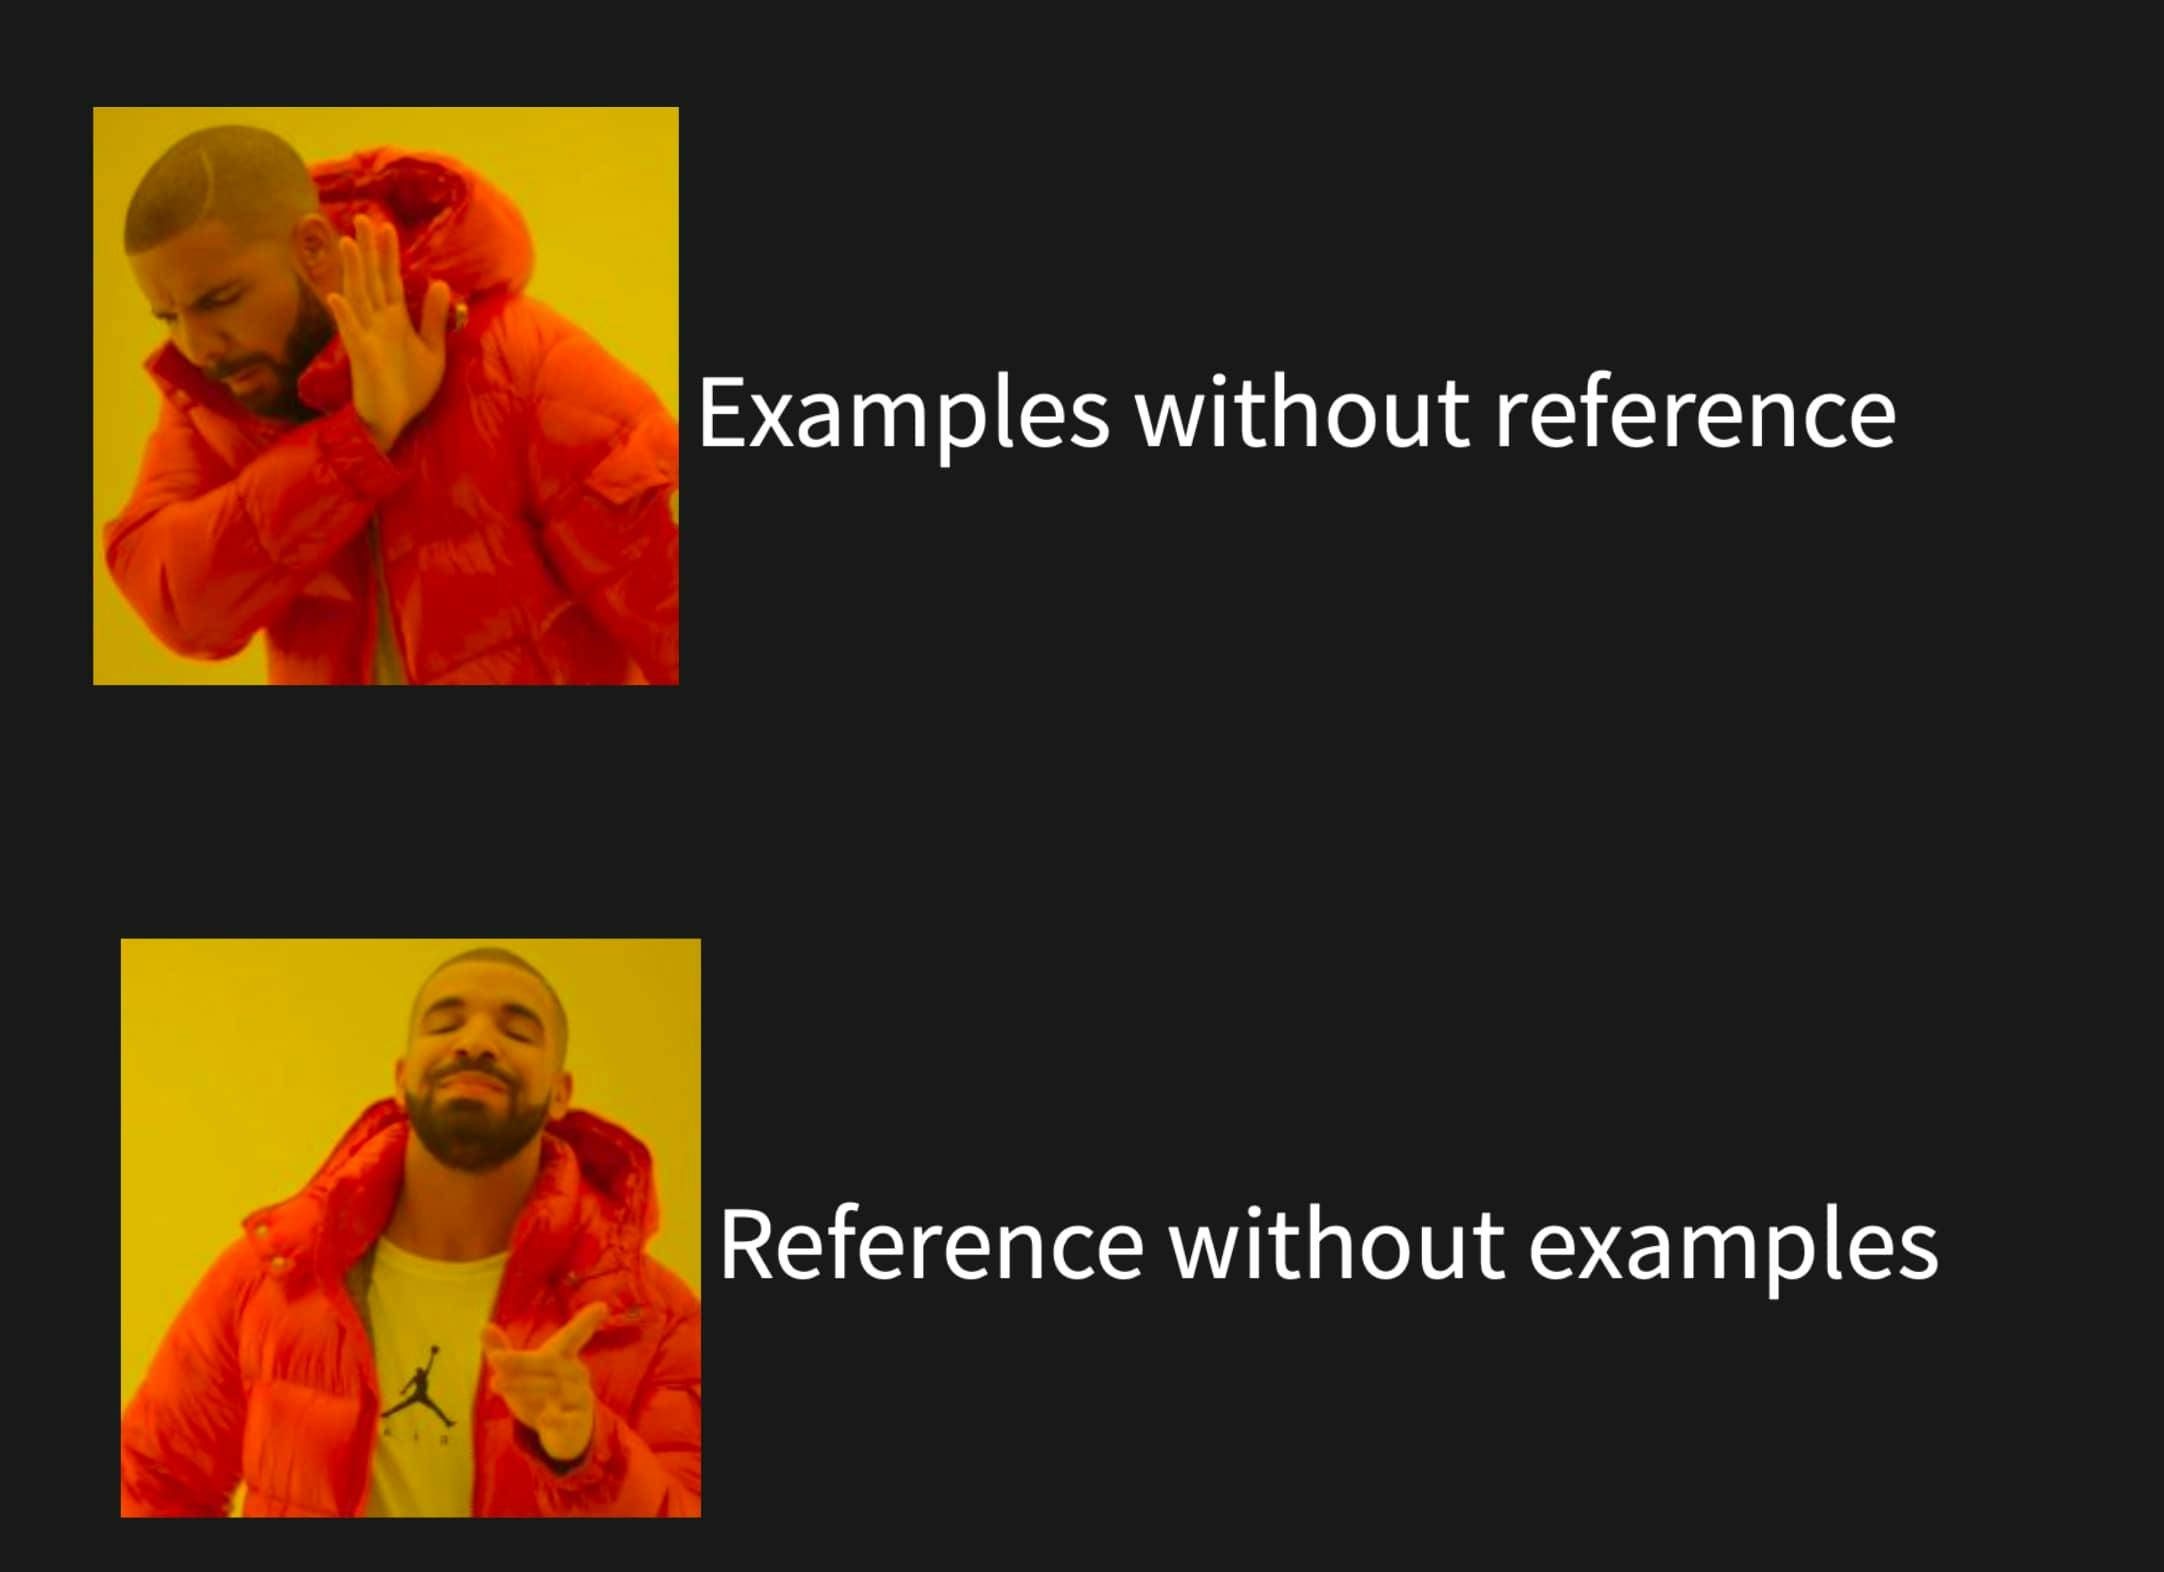 Don't: Examples without reference. Do: Reference without examples.